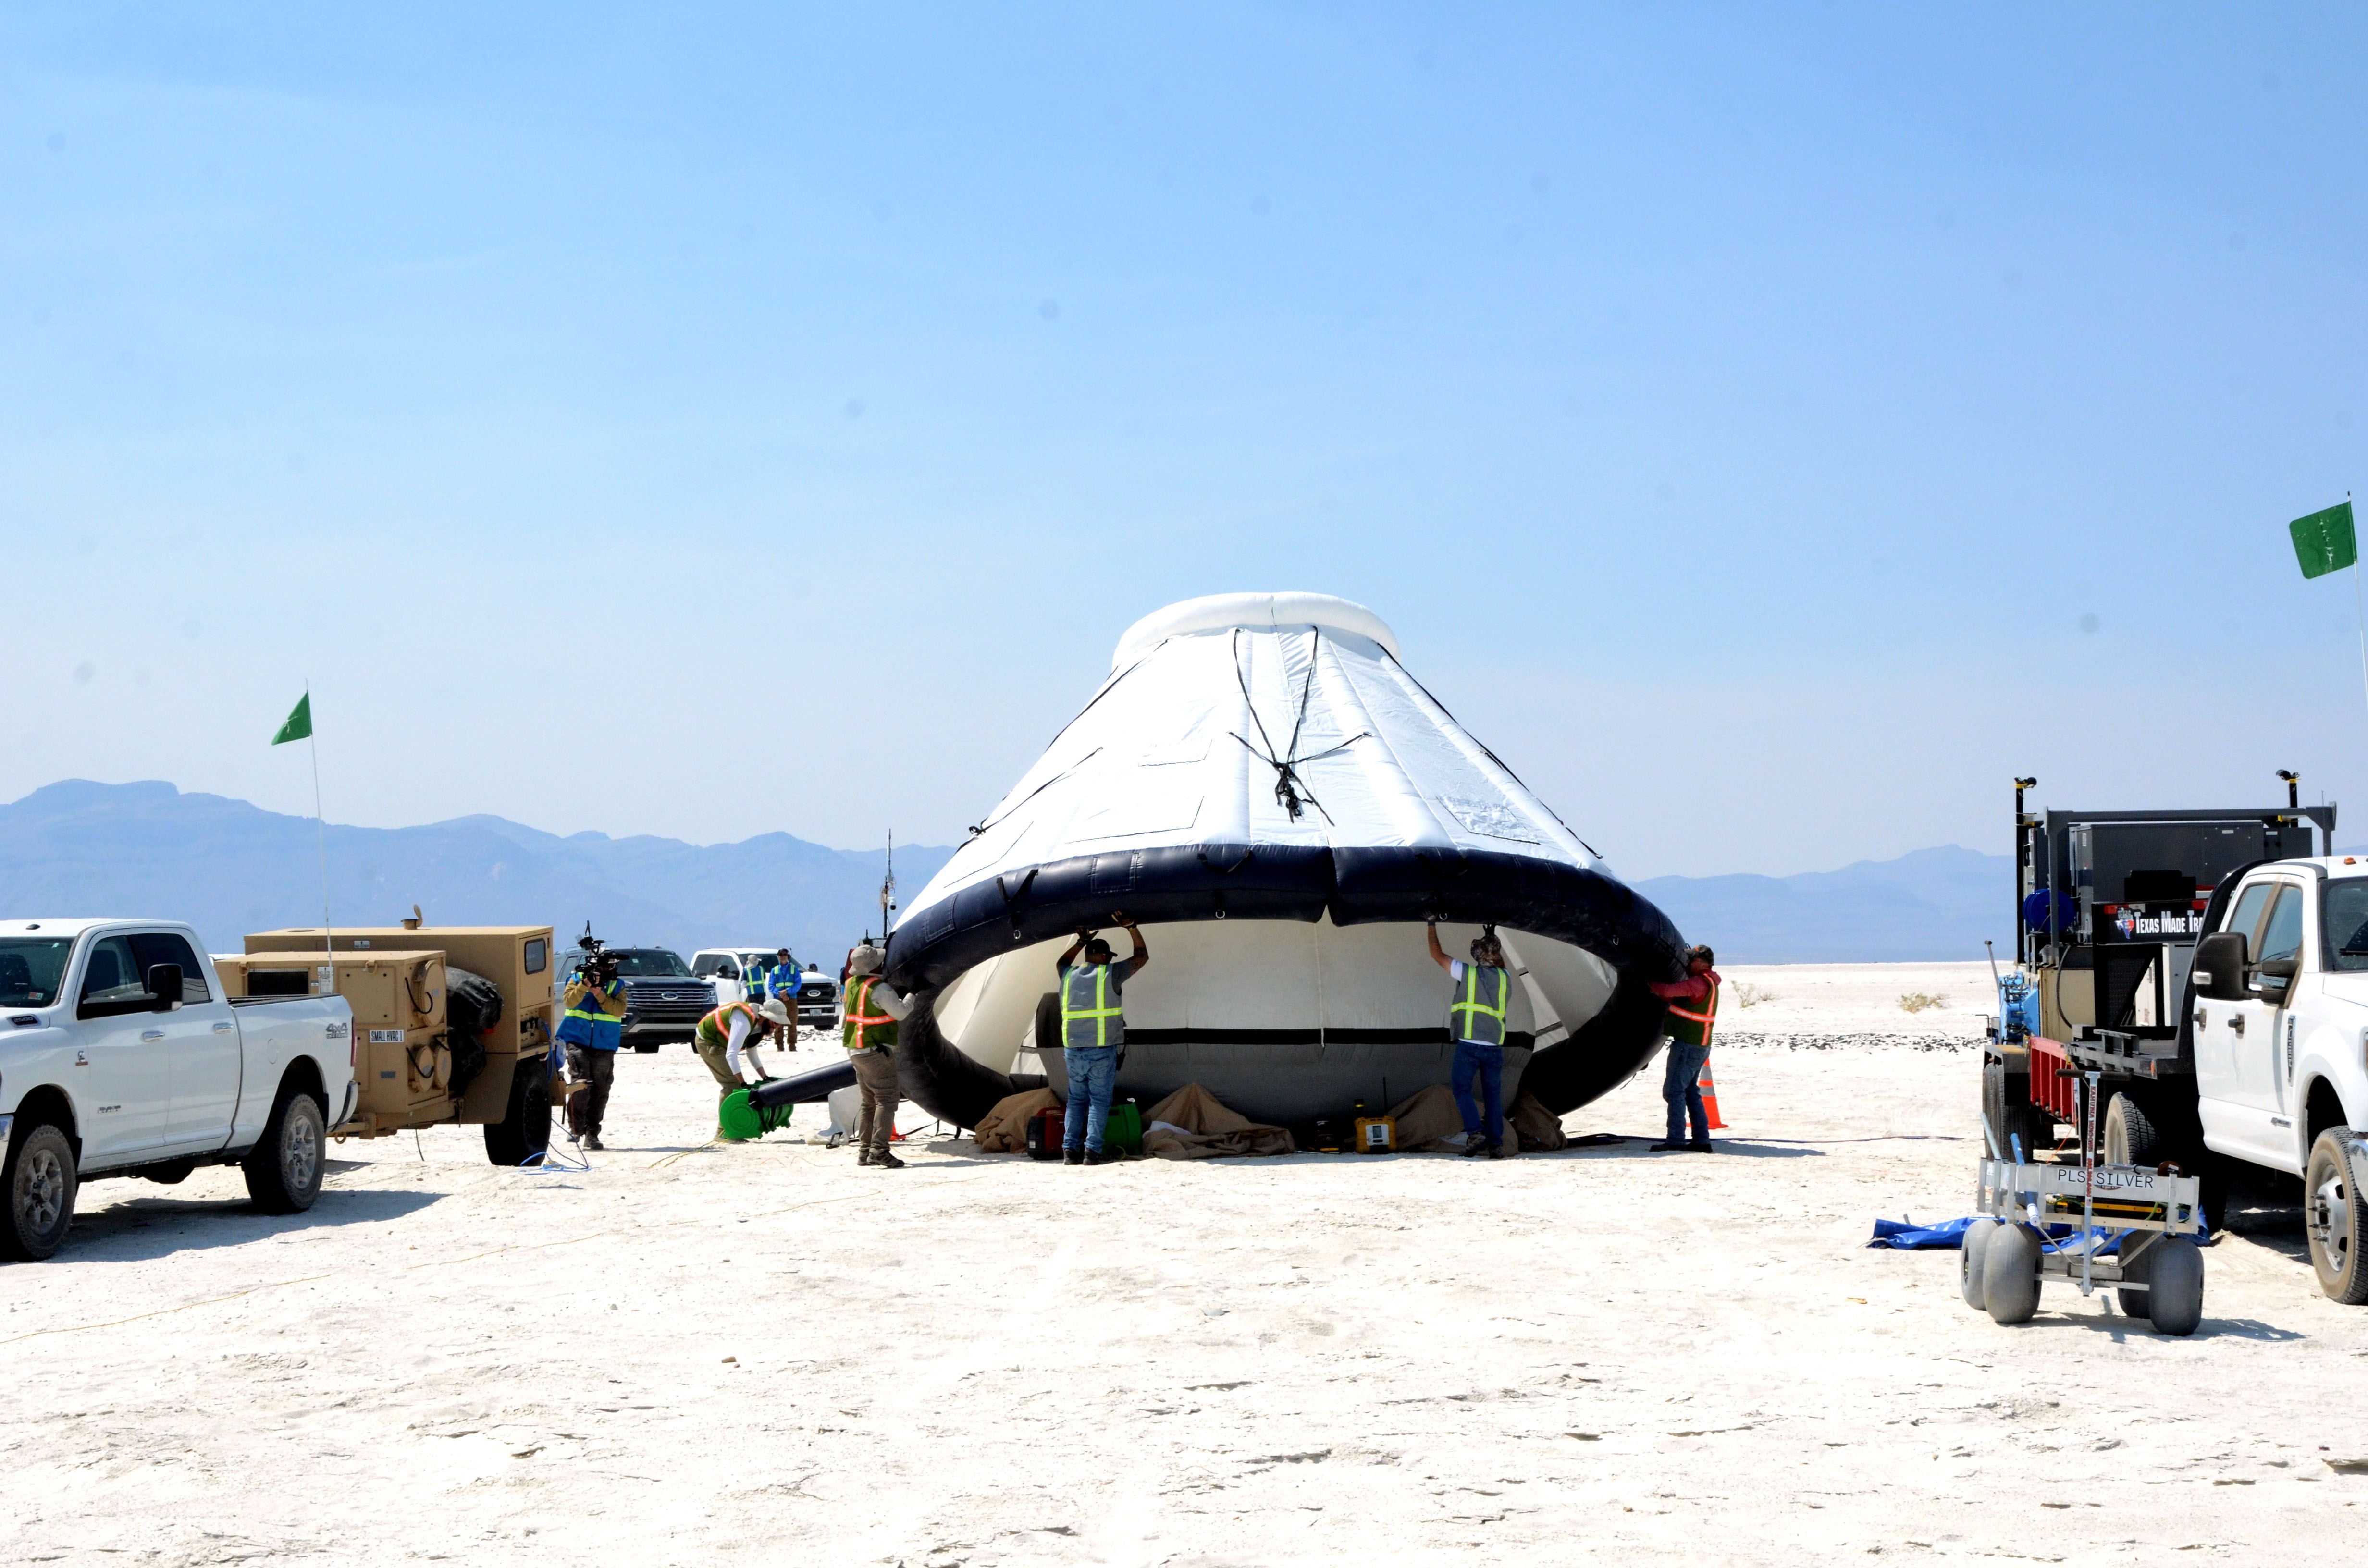 Another view of the OFT-2 landing and recovery dress rehearsal at White Sands Missile Range on May 18, 2022.